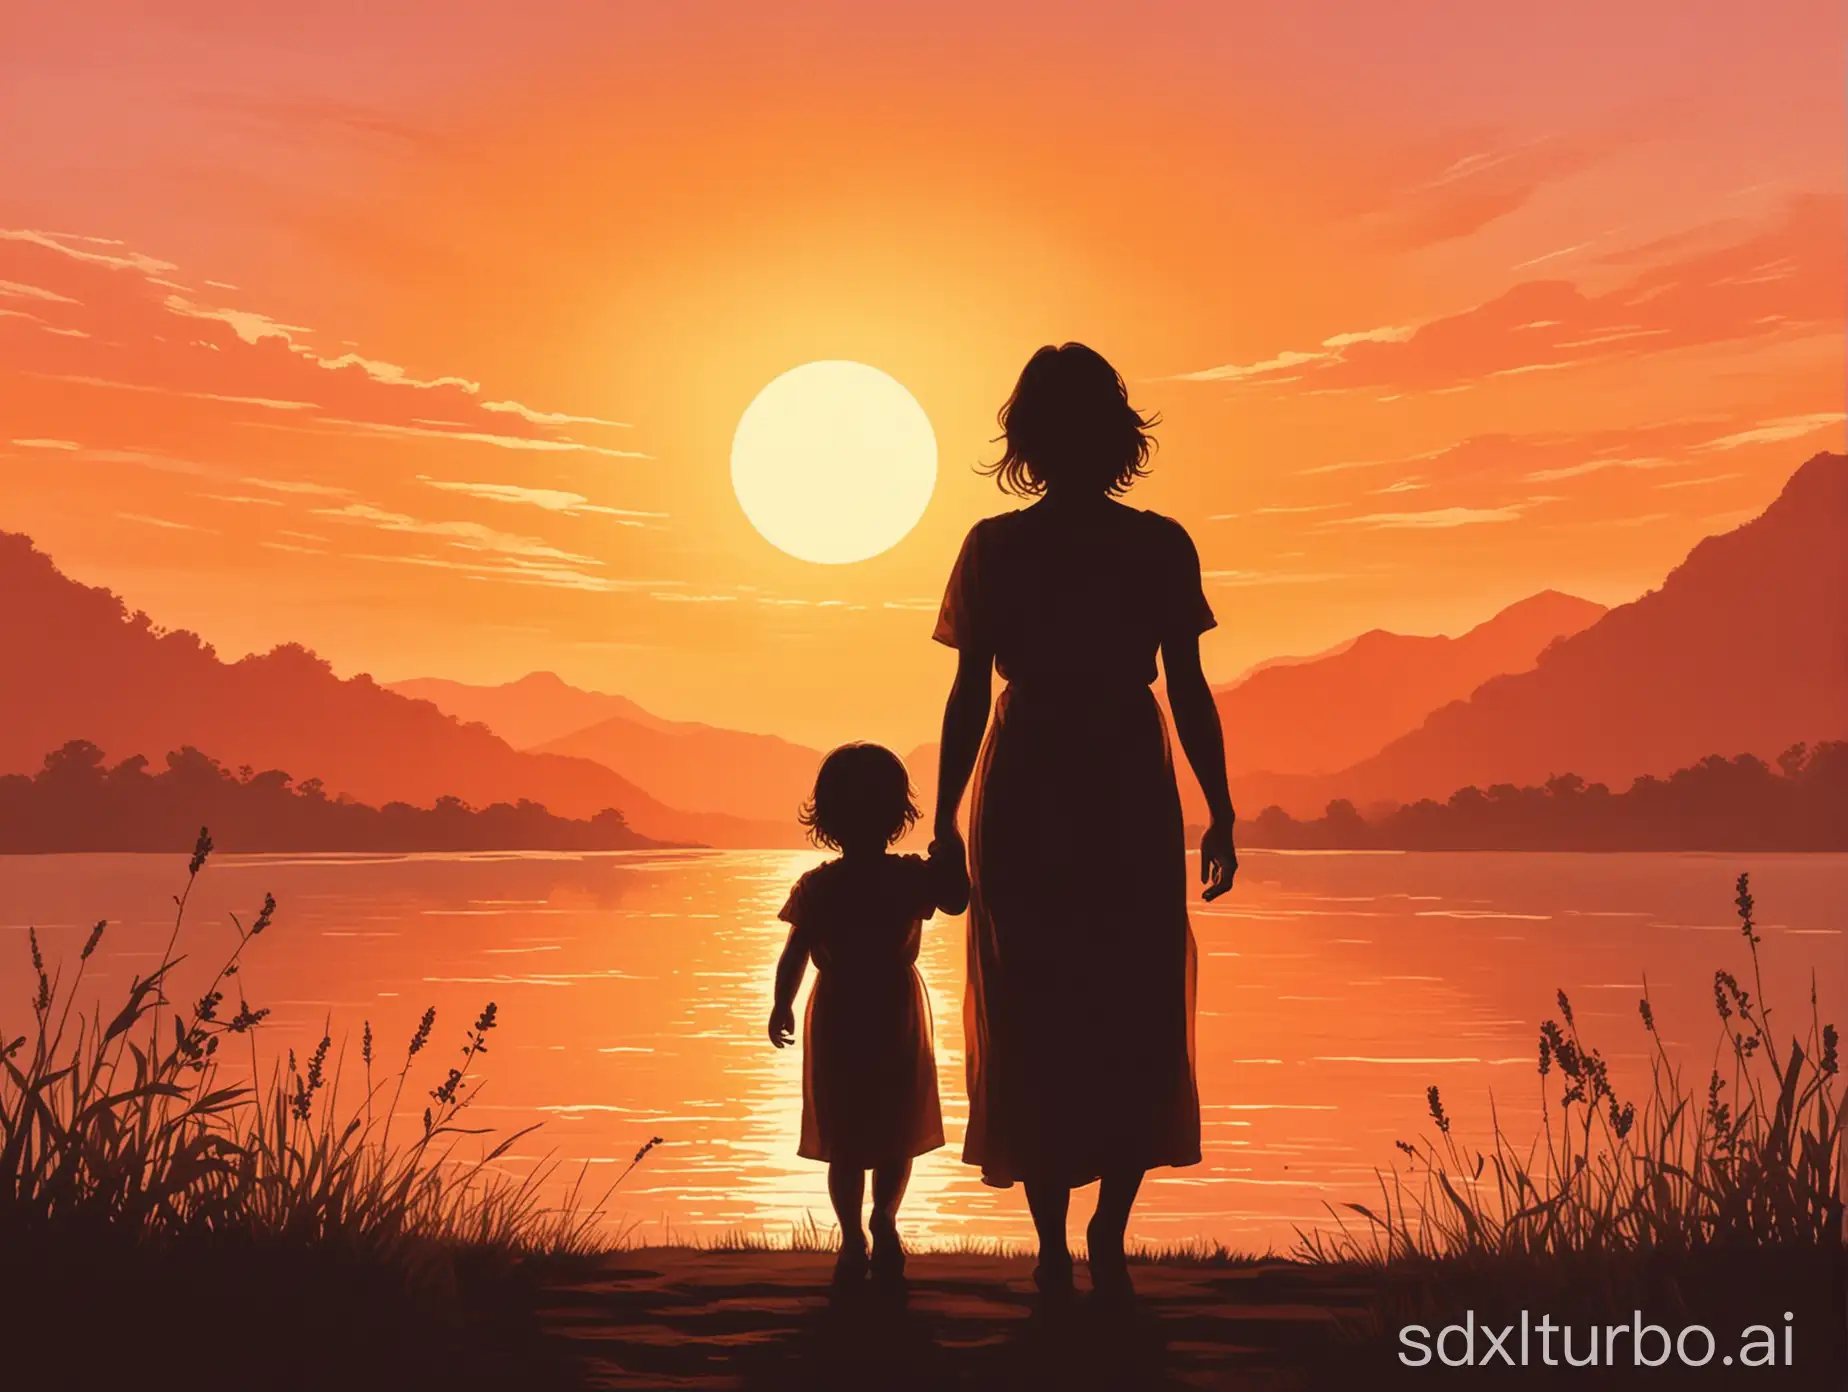 An illustration of a mother and child silhouetted against a warm sunset, radiating a sense of tranquility and peace.